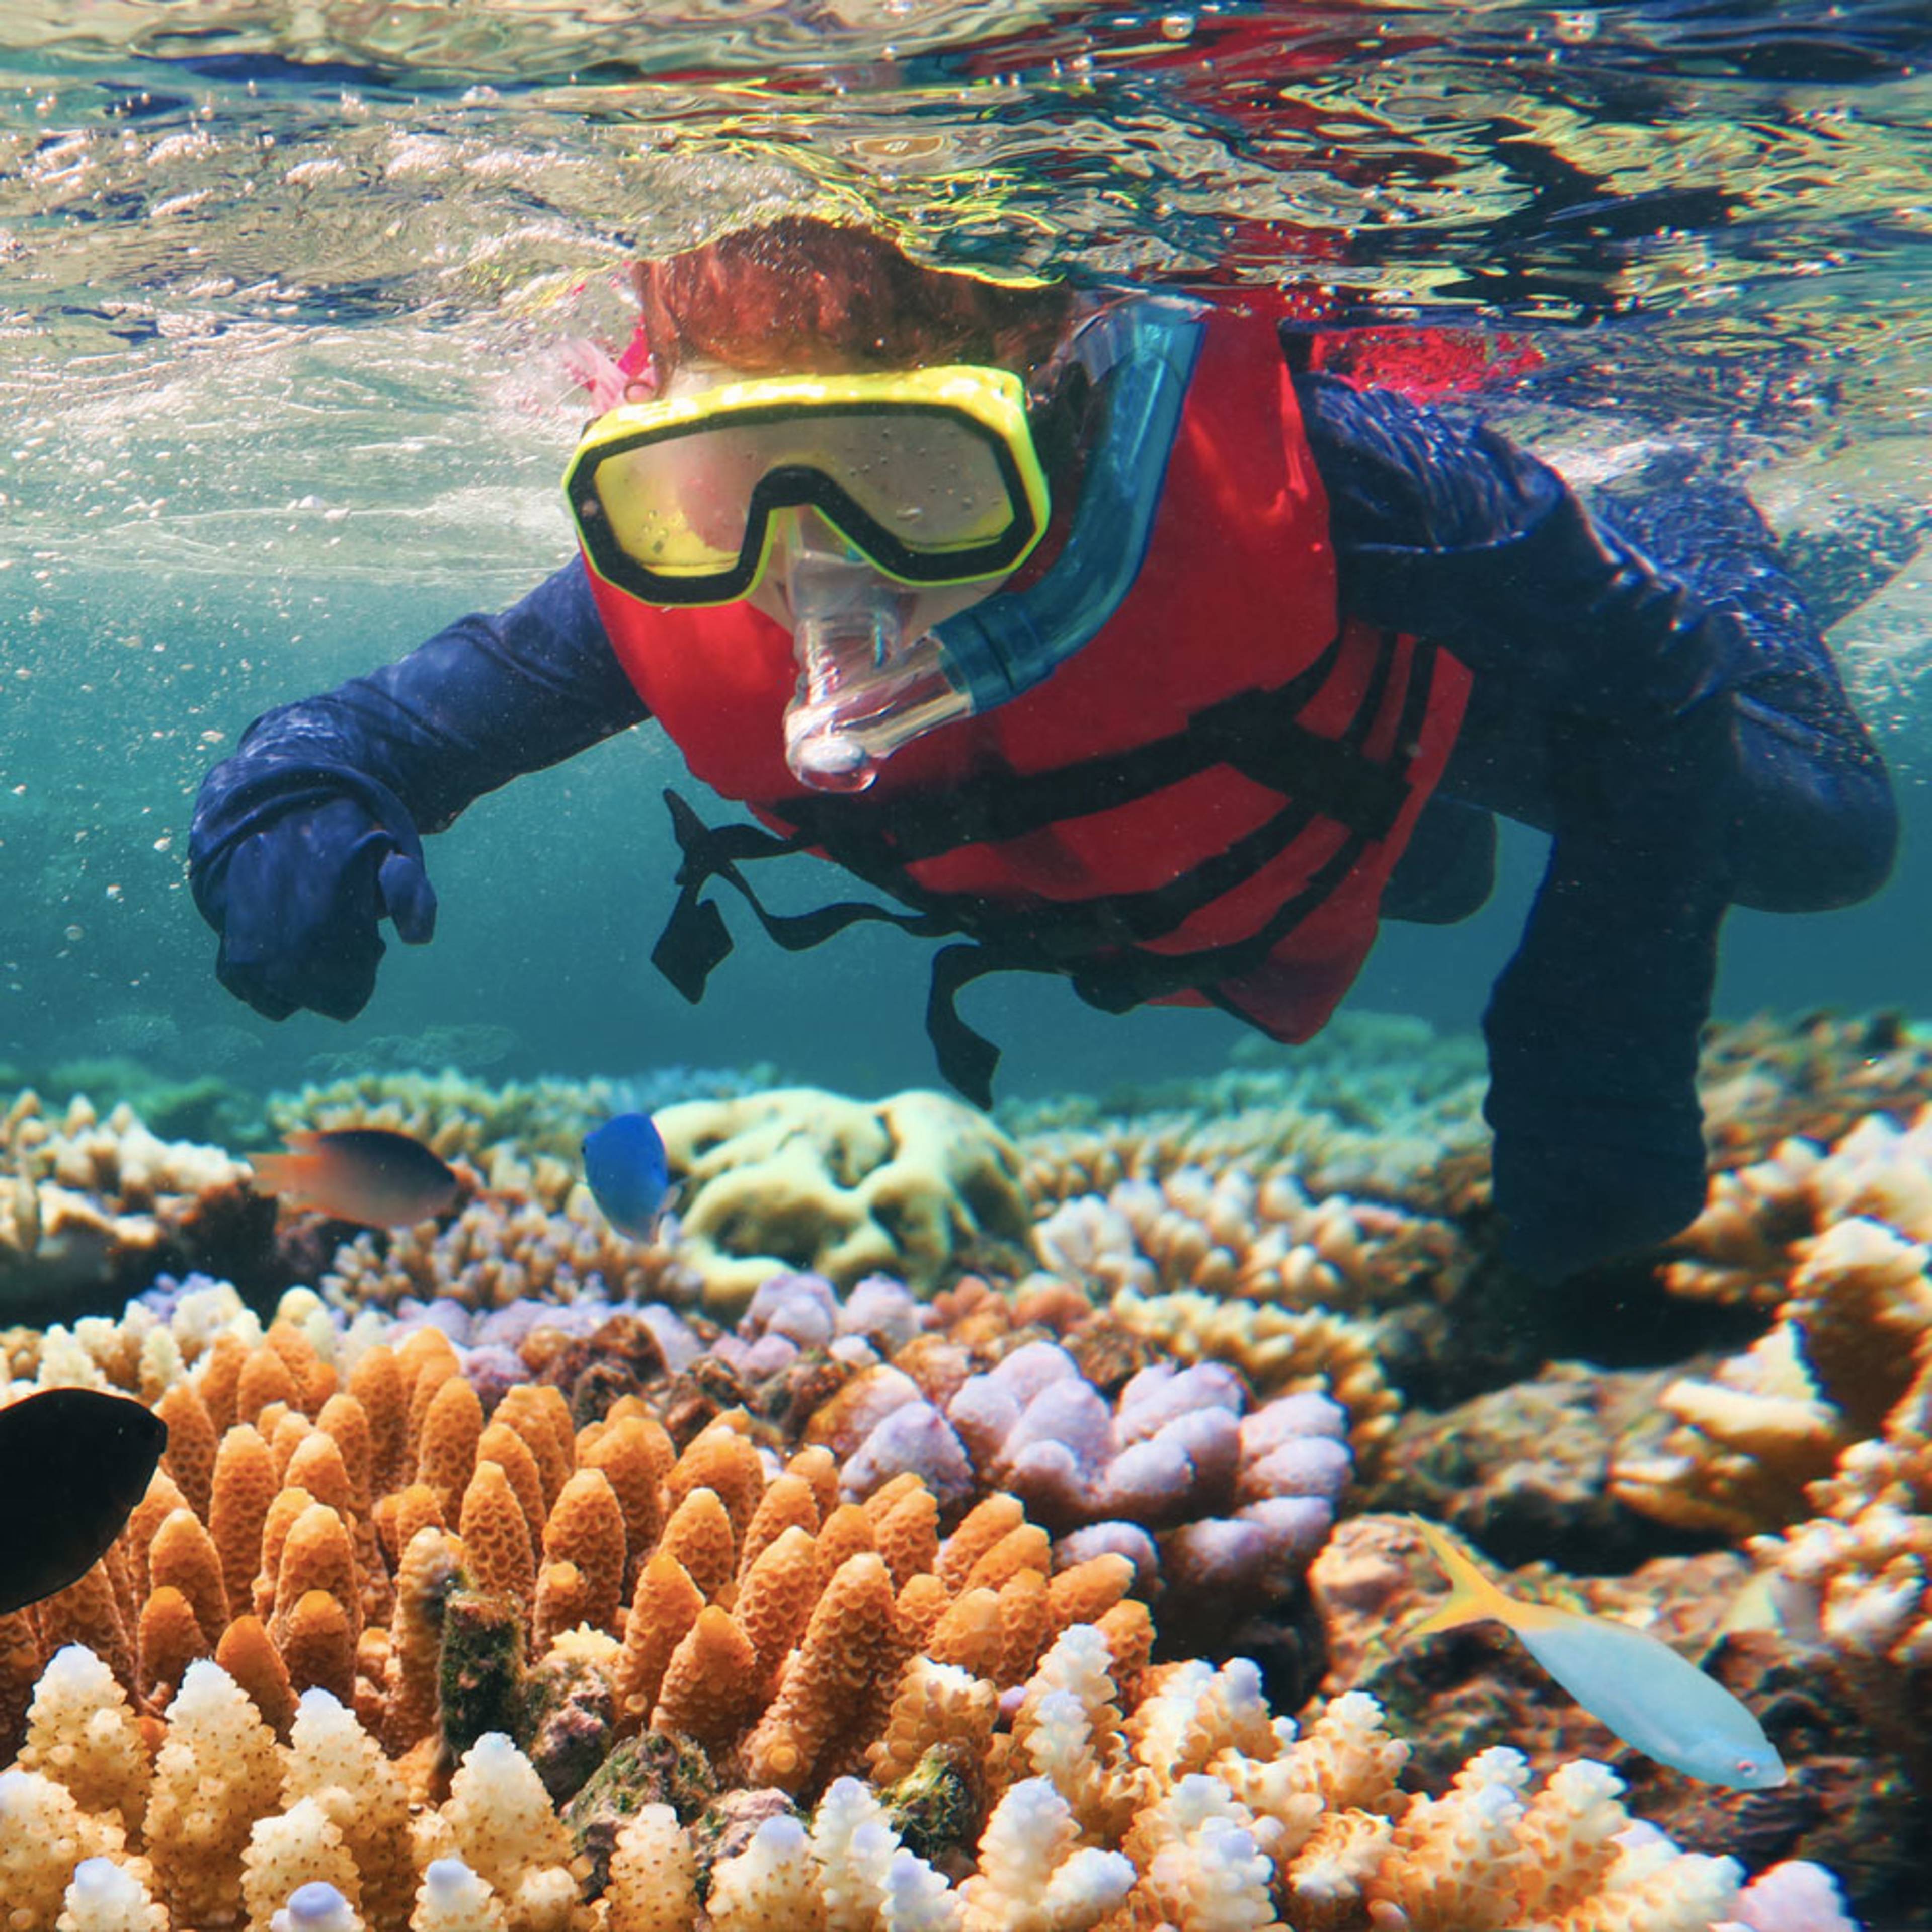 Experience scuba diving in Australia with a hand-picked local expert